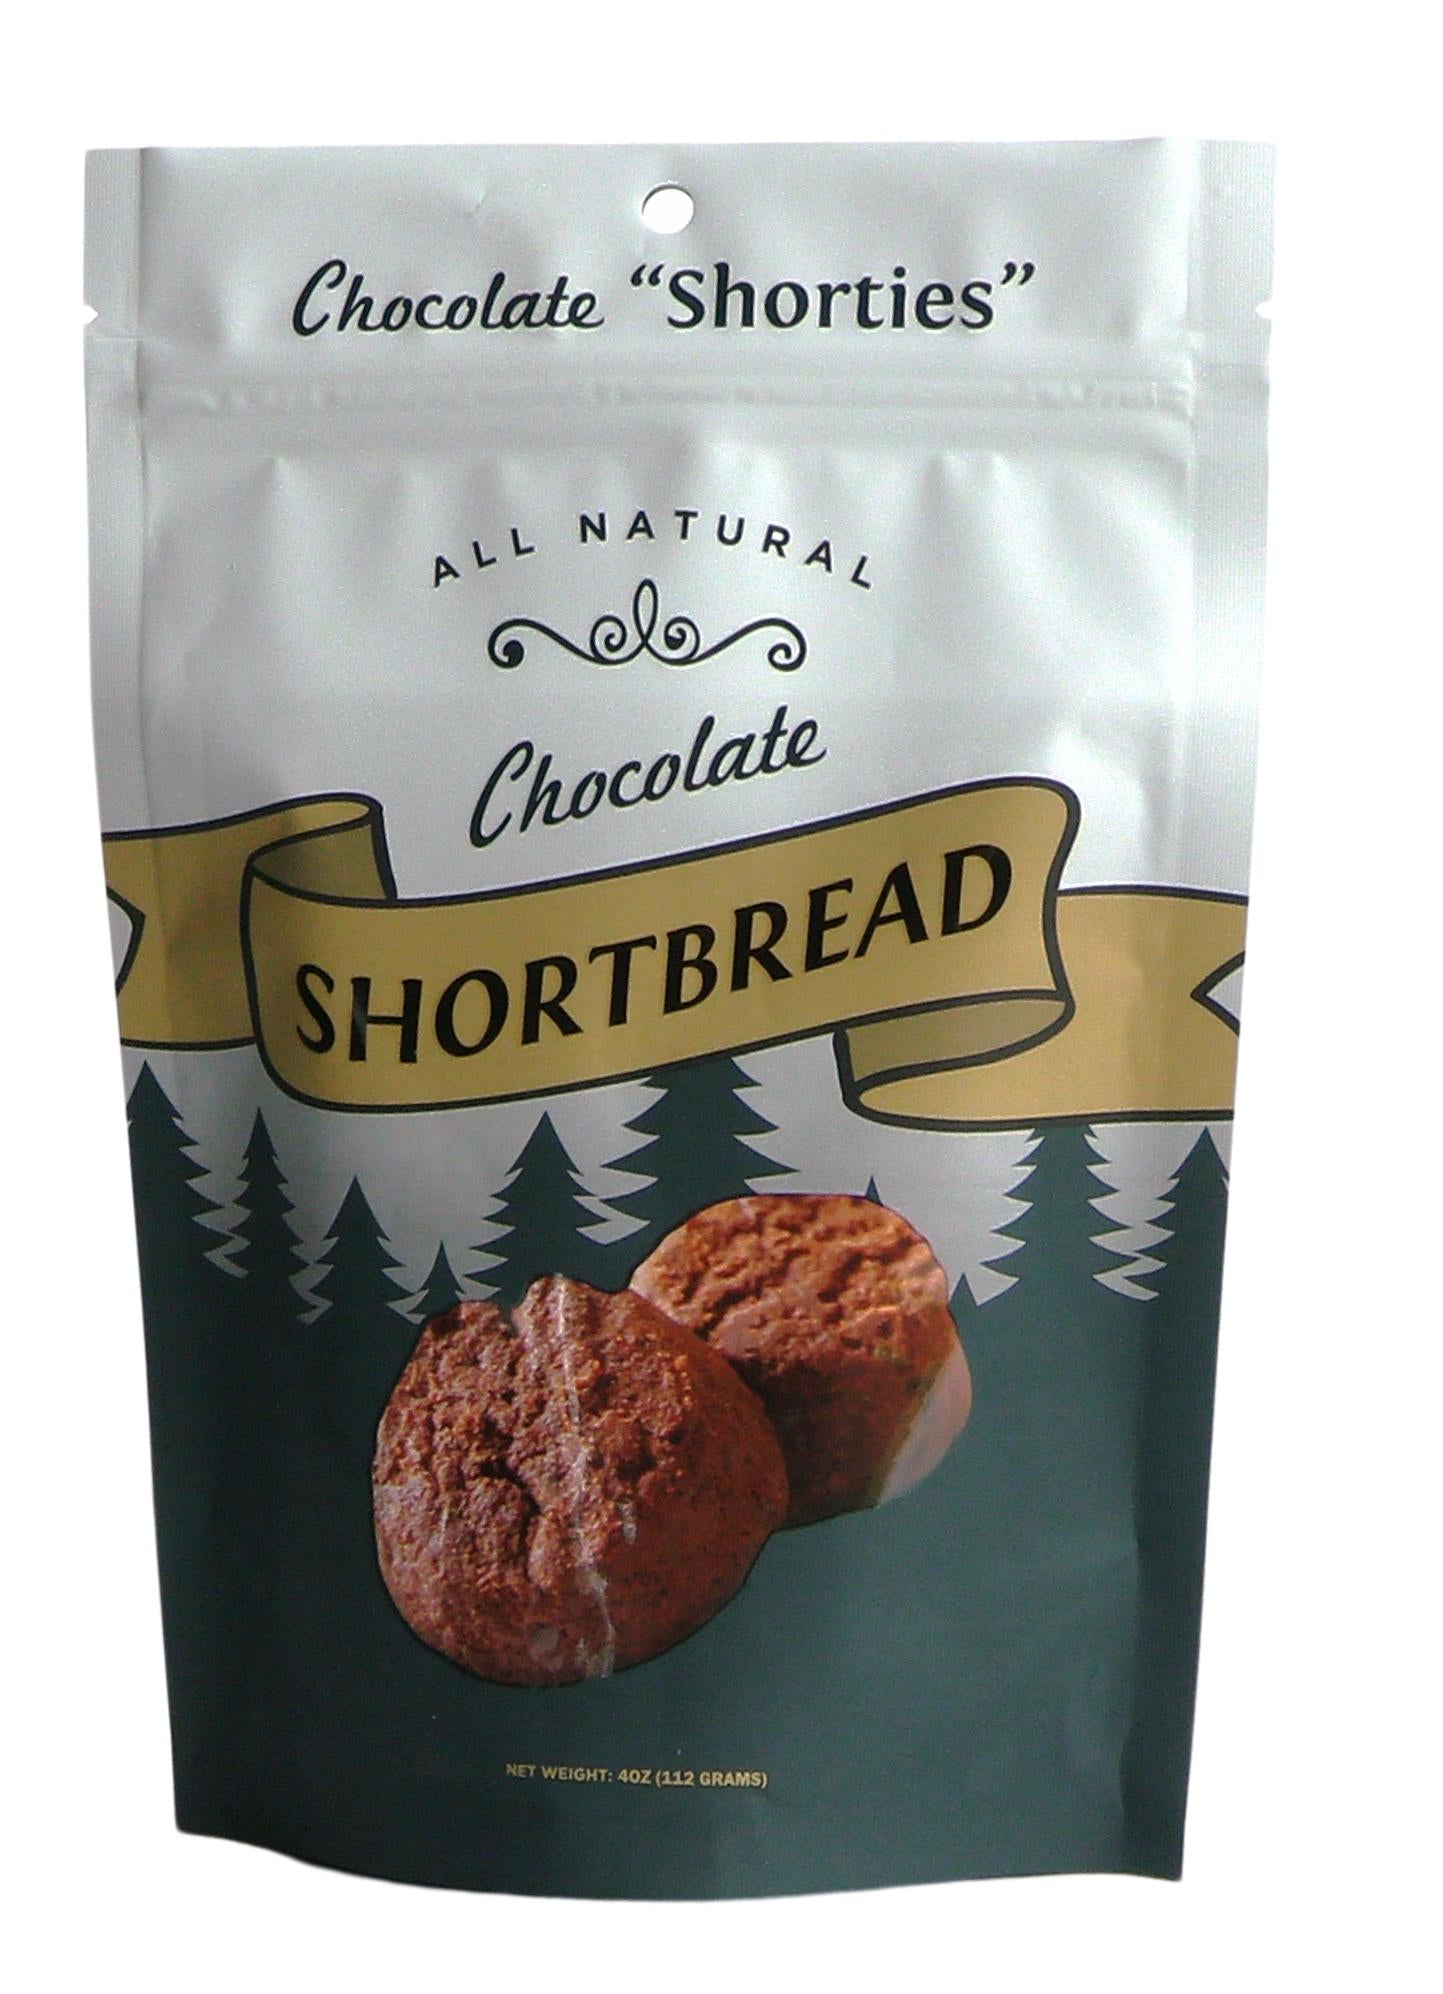 4 ounce pouch of chocolate shortbread cookies